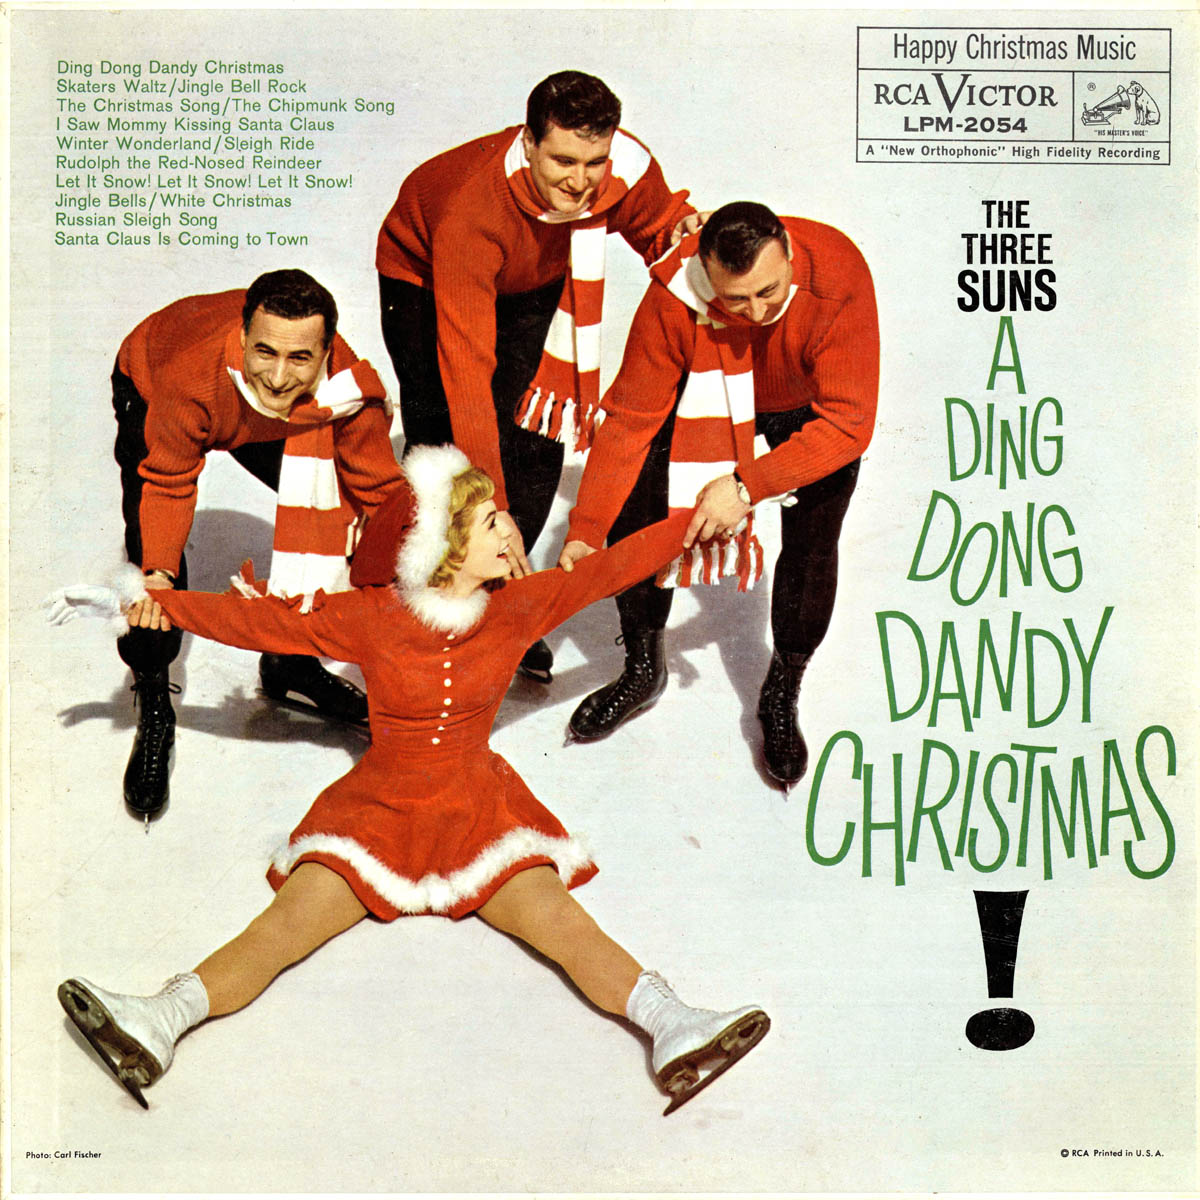 [The+Three+Suns-A+Ding+Dong+Dandy+Christmas-Smaller.jpg]